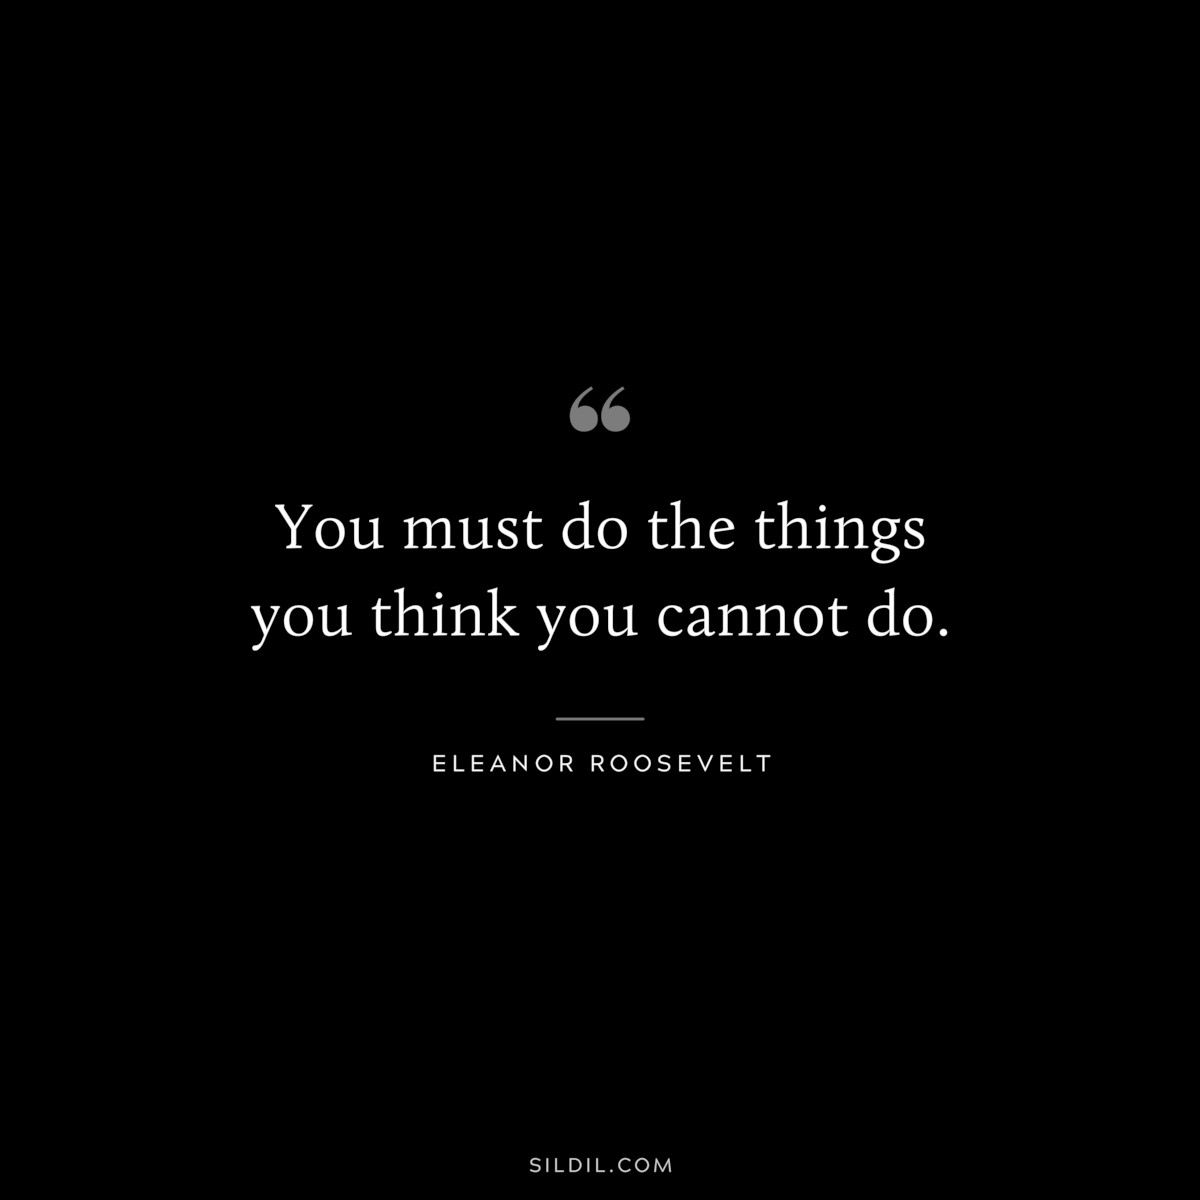 You must do the things you think you cannot do. ― Eleanor Roosevelt